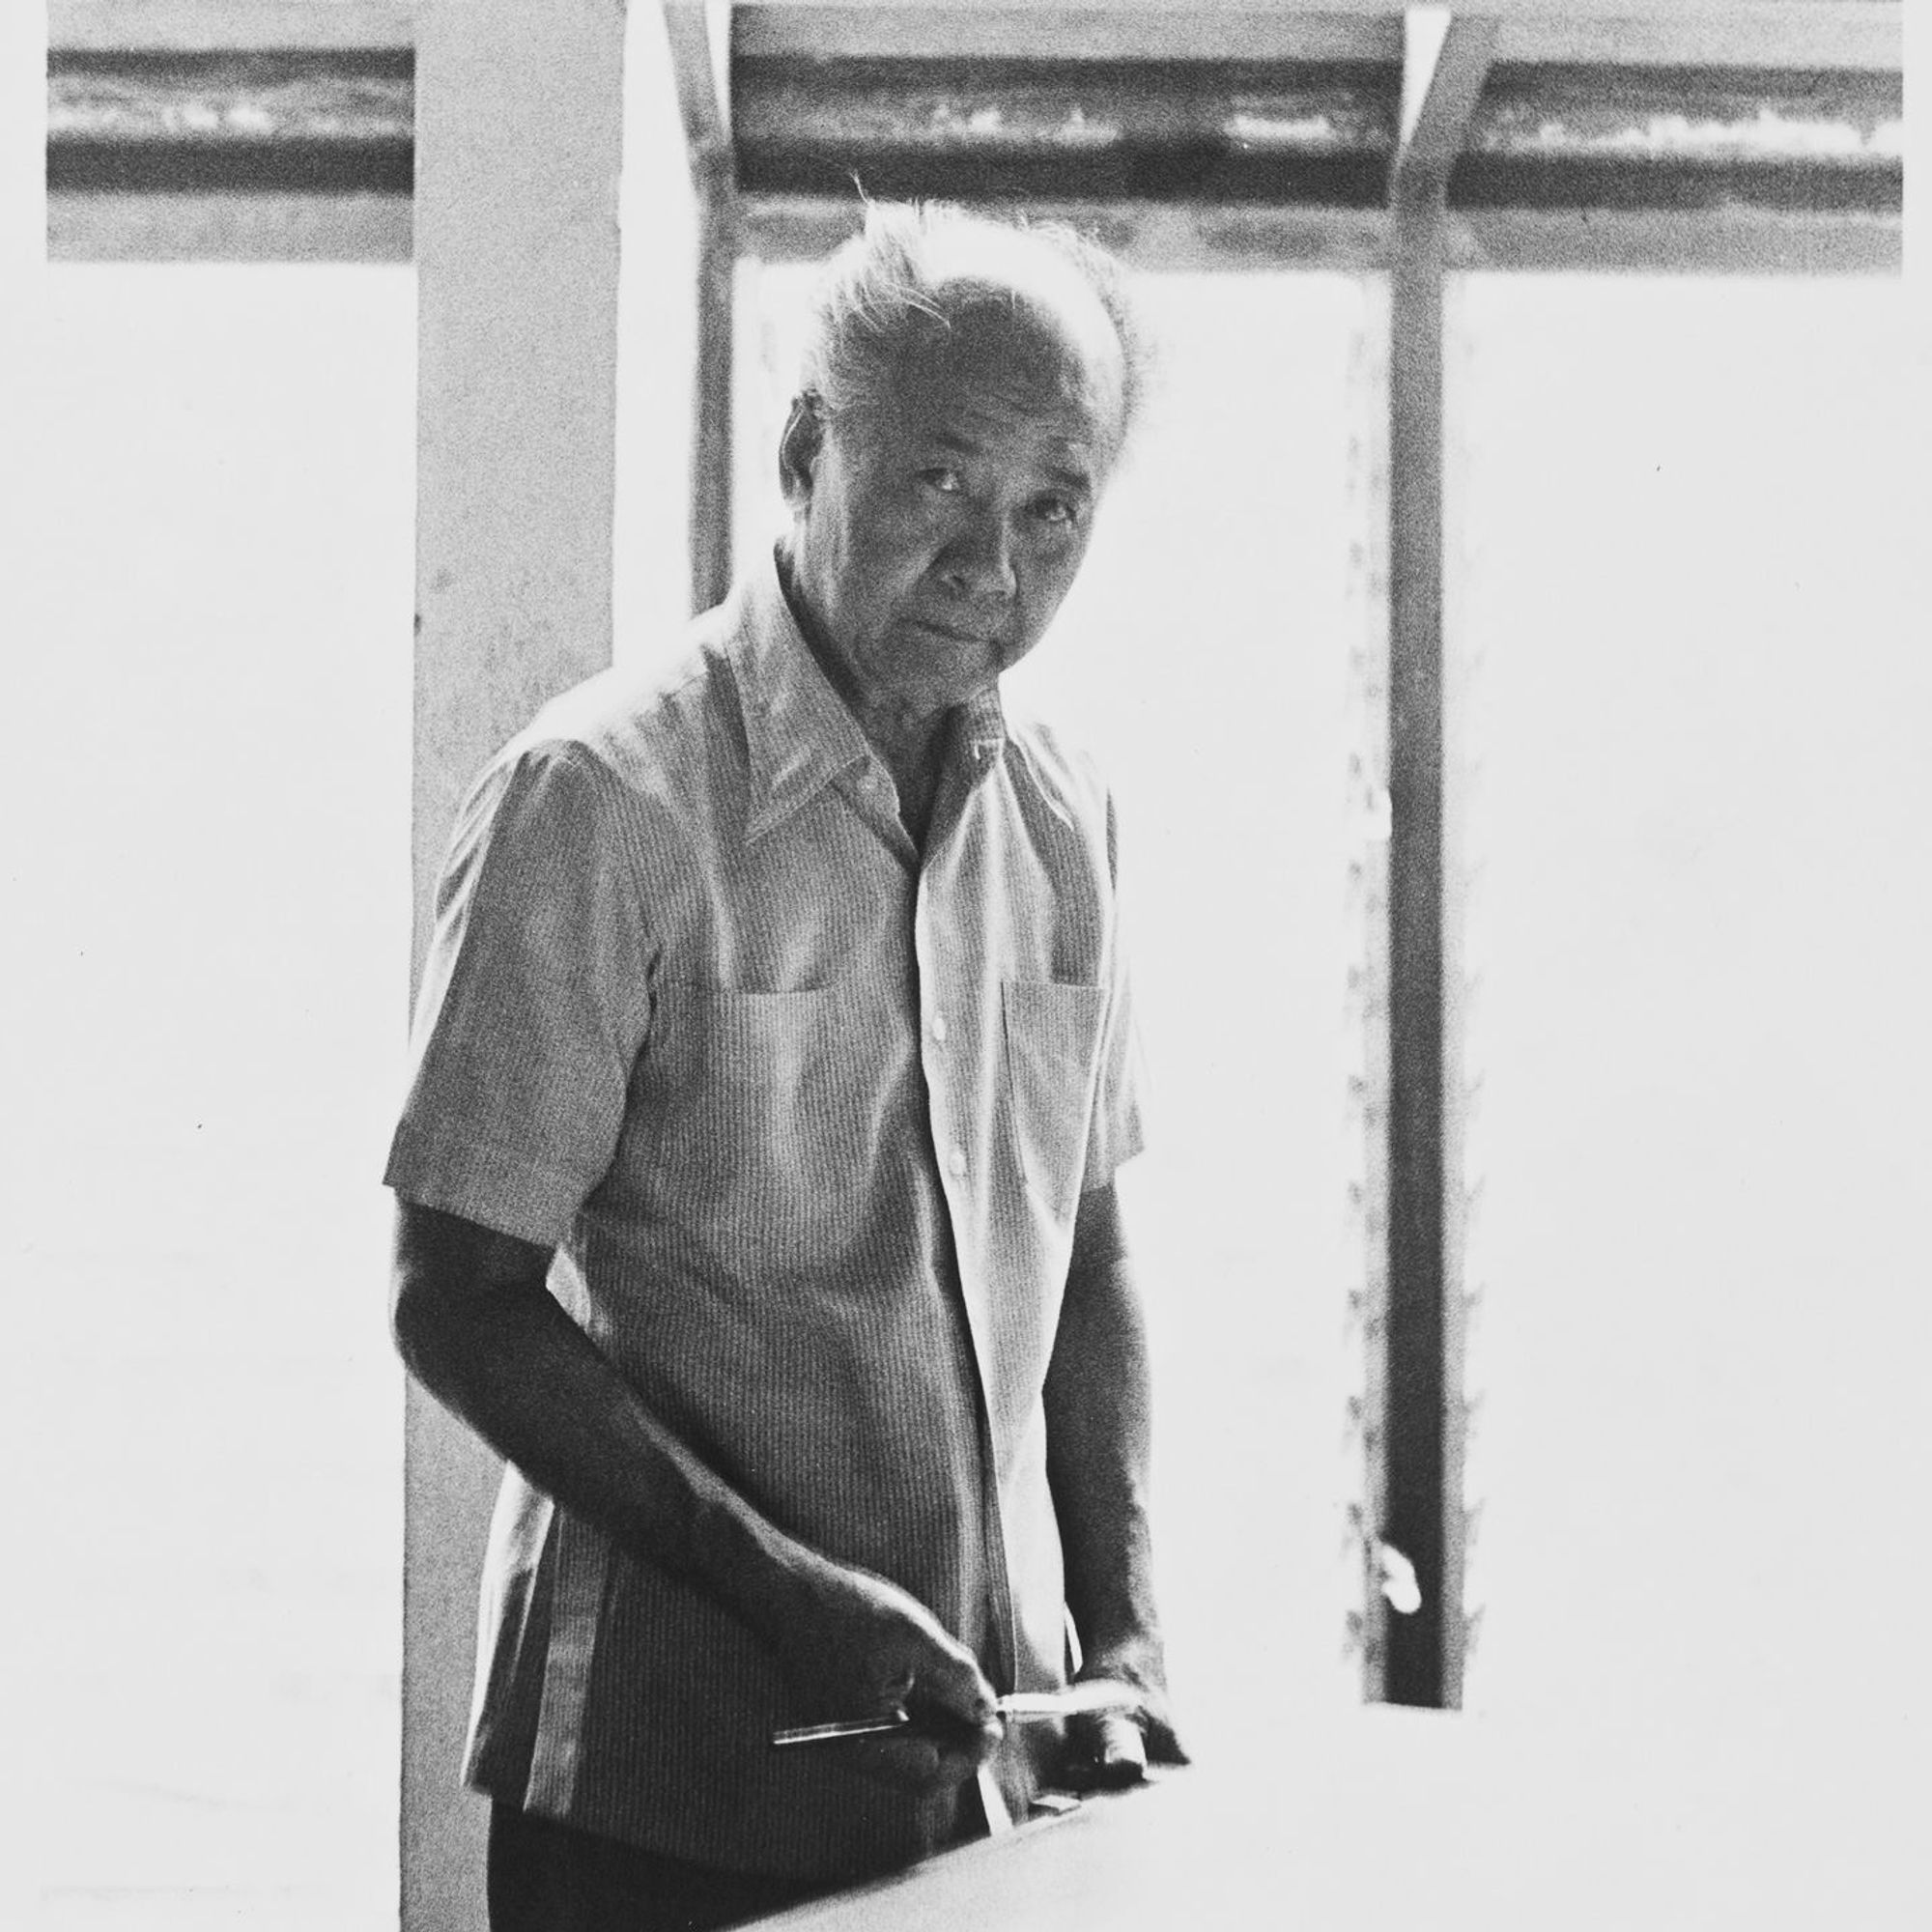 Bernardo stands at a table as an old man, gazing at the viewer.